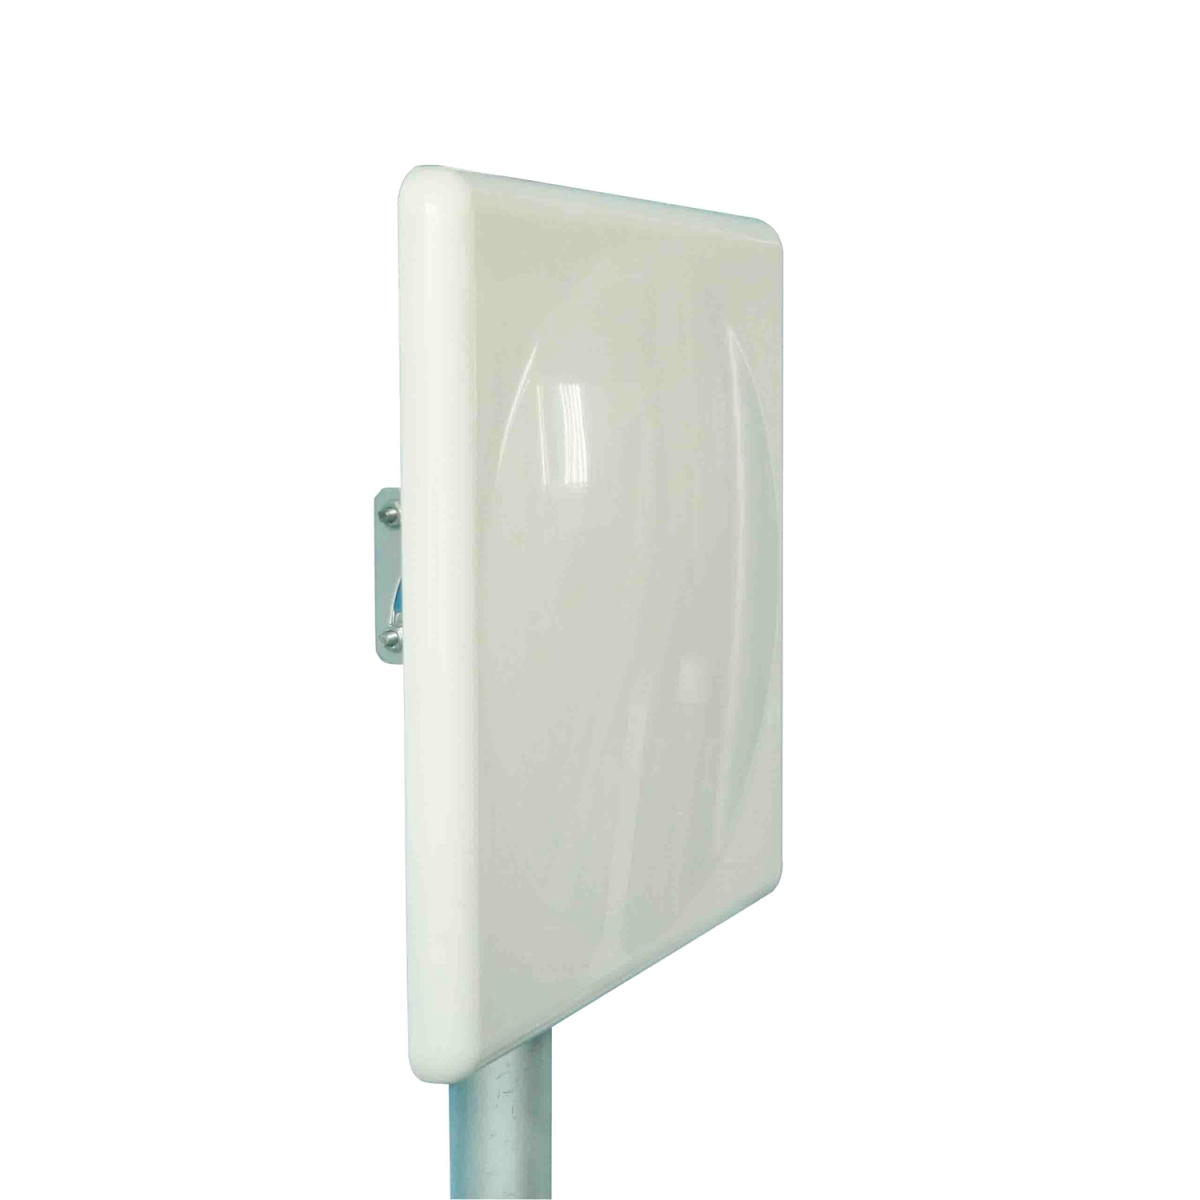 Picture of Turmode WAP24184 Panel WiFi Antenna for 2.4GHz